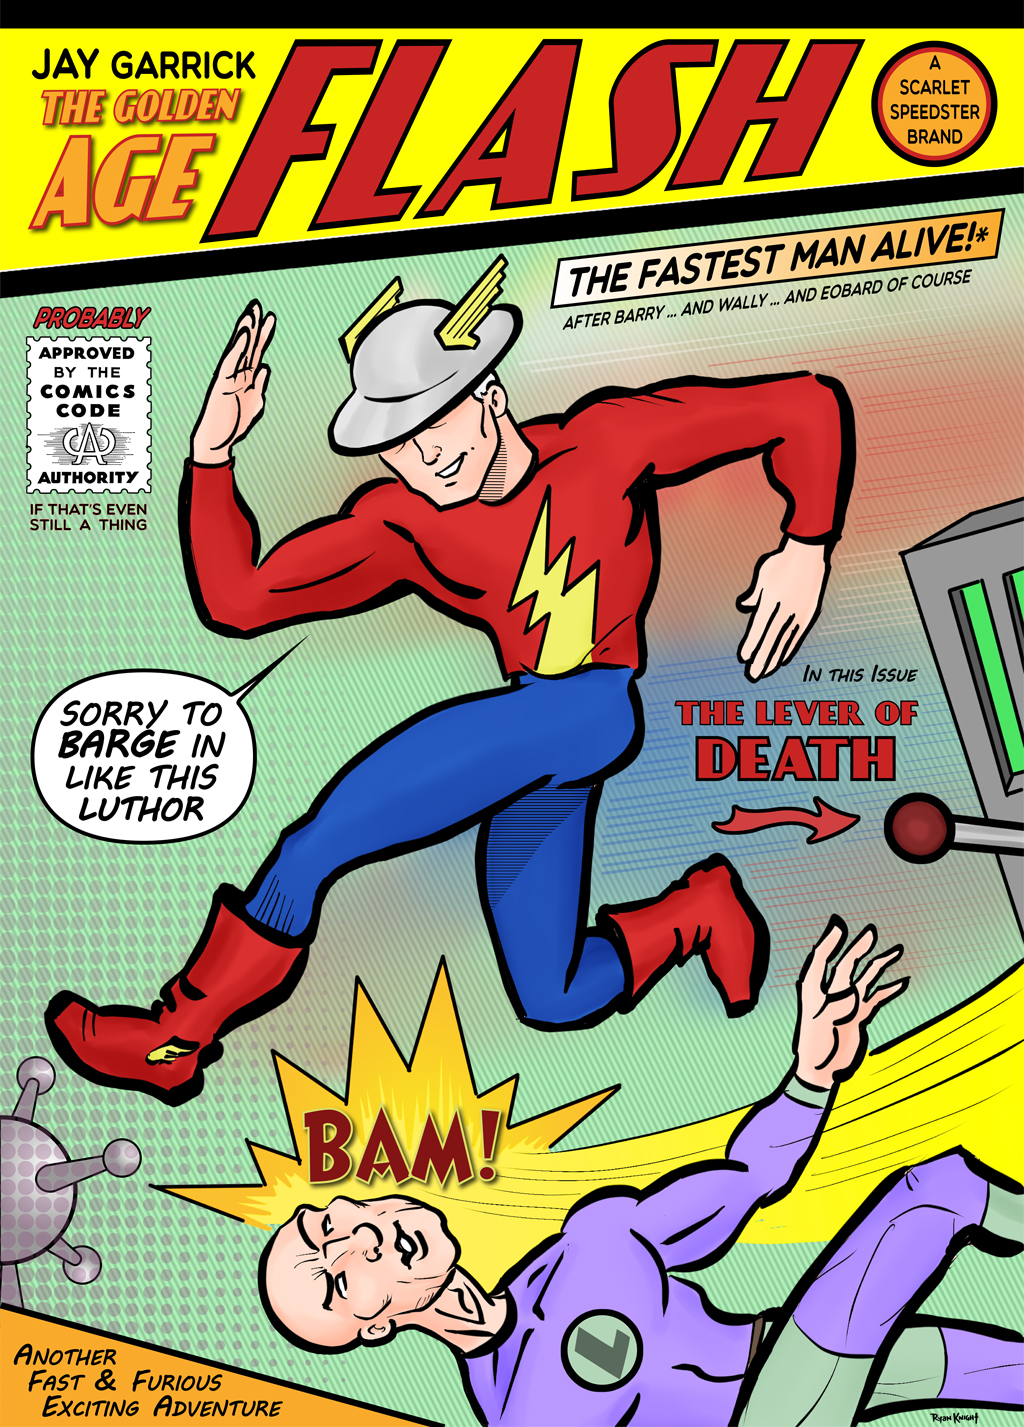 Jay Garrick: The Golden Age Flash - The Fastest Man Alive*